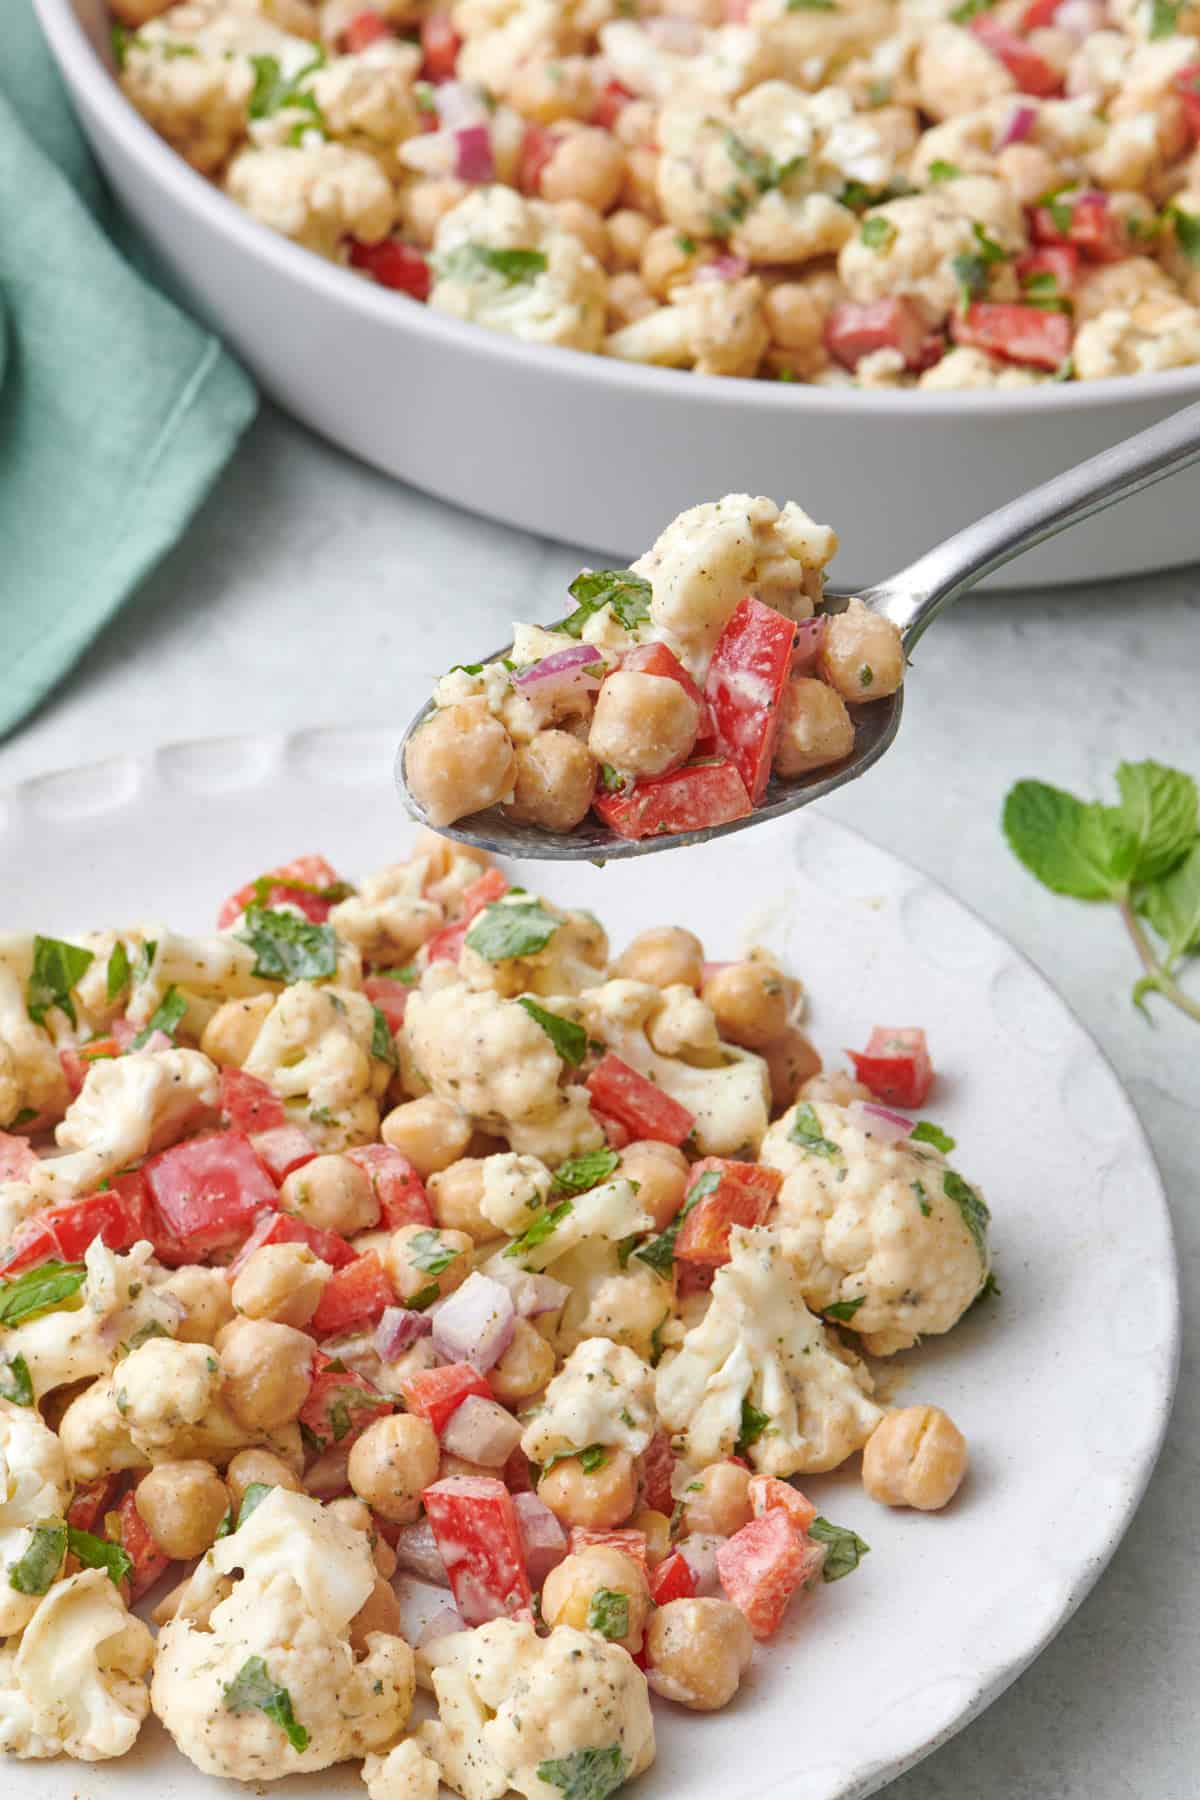 Spoon lifting up a bite of cauliflower salad with chickpeas.